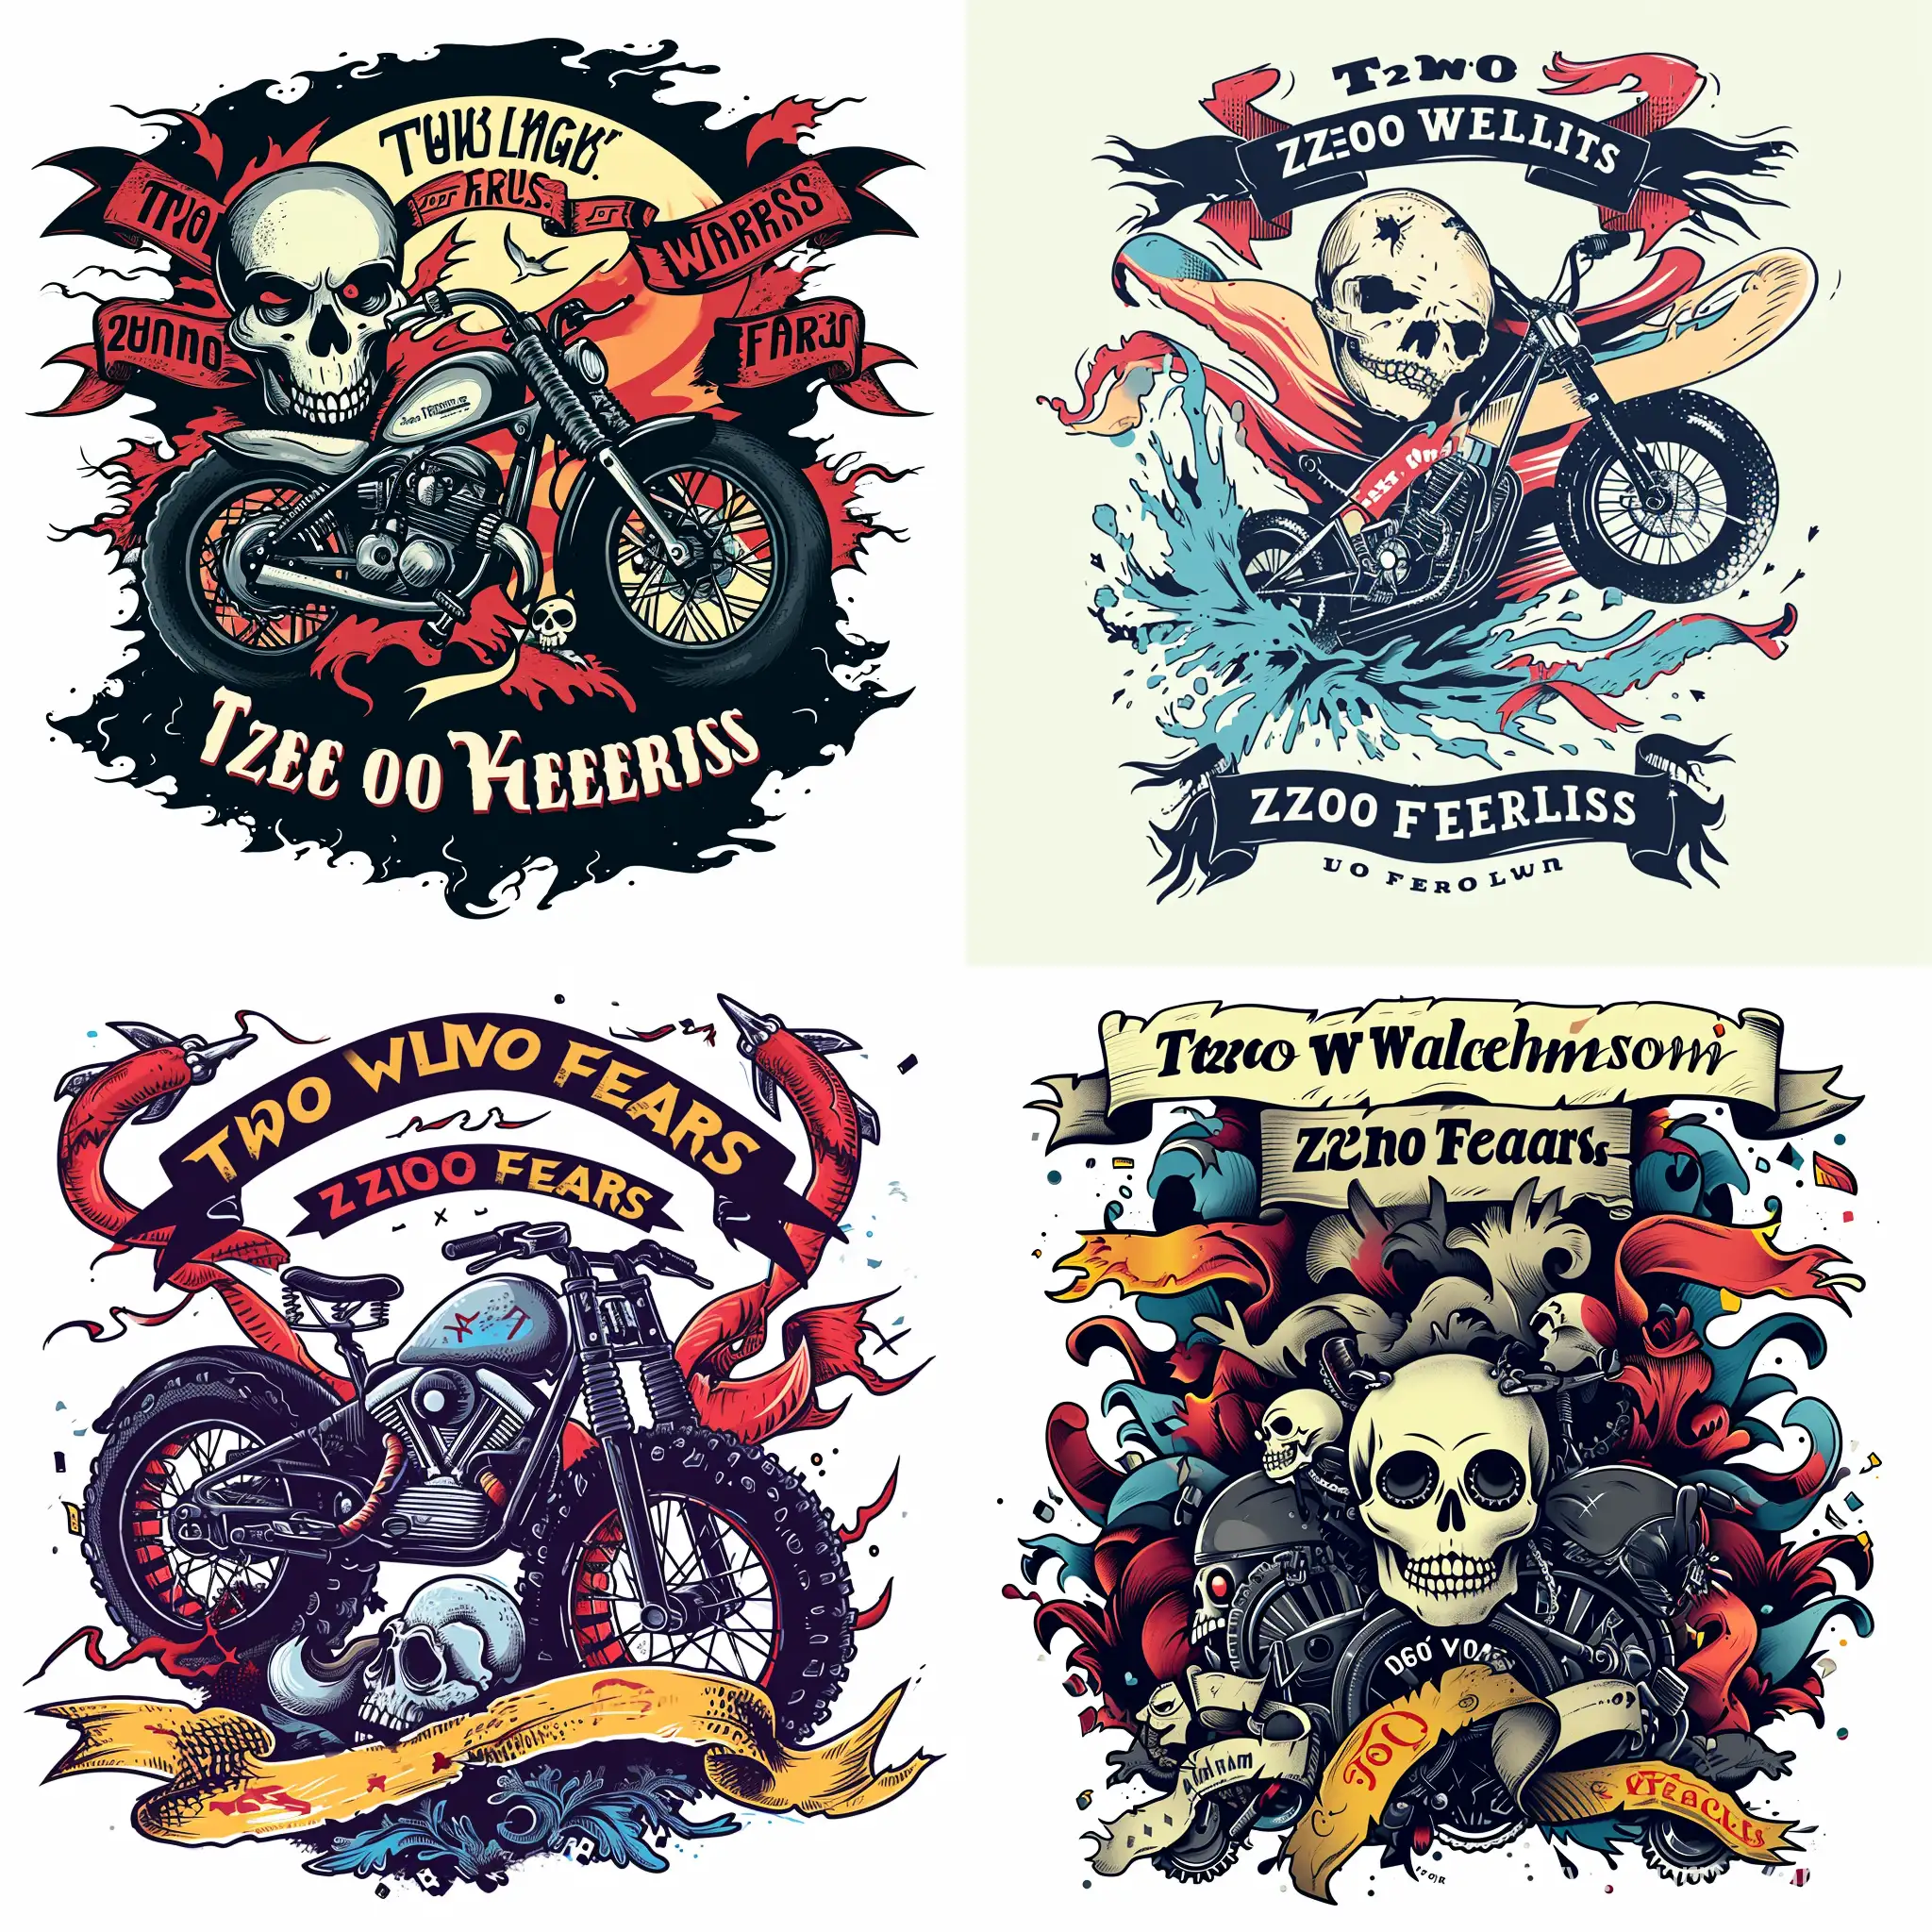 Create a digital cartoon style Art illustration with incorporate the text (Two Wheels:Zero Fears), bike, skull, ribbons, puns, and place additional graphics elements in a way that supports the main design that look together harmoniously.  Ensure the design is symmetrical and well-aligned accordingly and not cut off the design edges or sides. Ensure the font complements the overall design without overpowering it. The text should be easily readable from a distance. Implement and placement the fonts to ensure your message stands out. Ensures that the design is visual appealing and capturing the essence of main typography message in a wearable form. Stick to the traditional colors like black, red, yellow in White background.